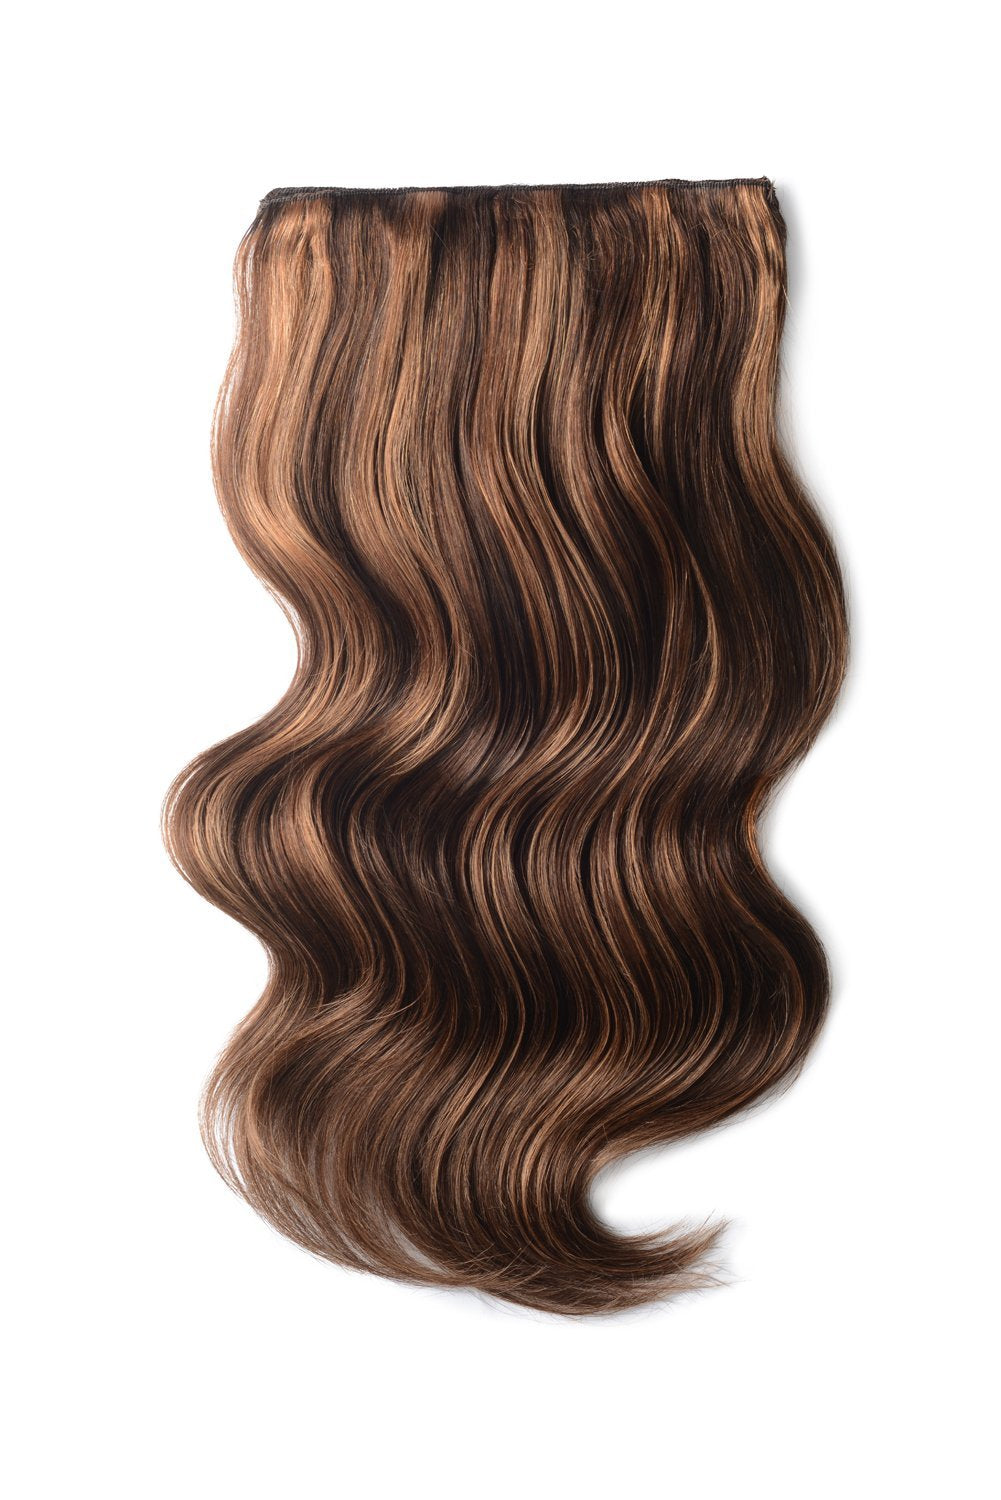 Double Wefted Full Head Remy Clip in Human Hair Extensions - Medium Brown/Auburn Mix (#4/30)